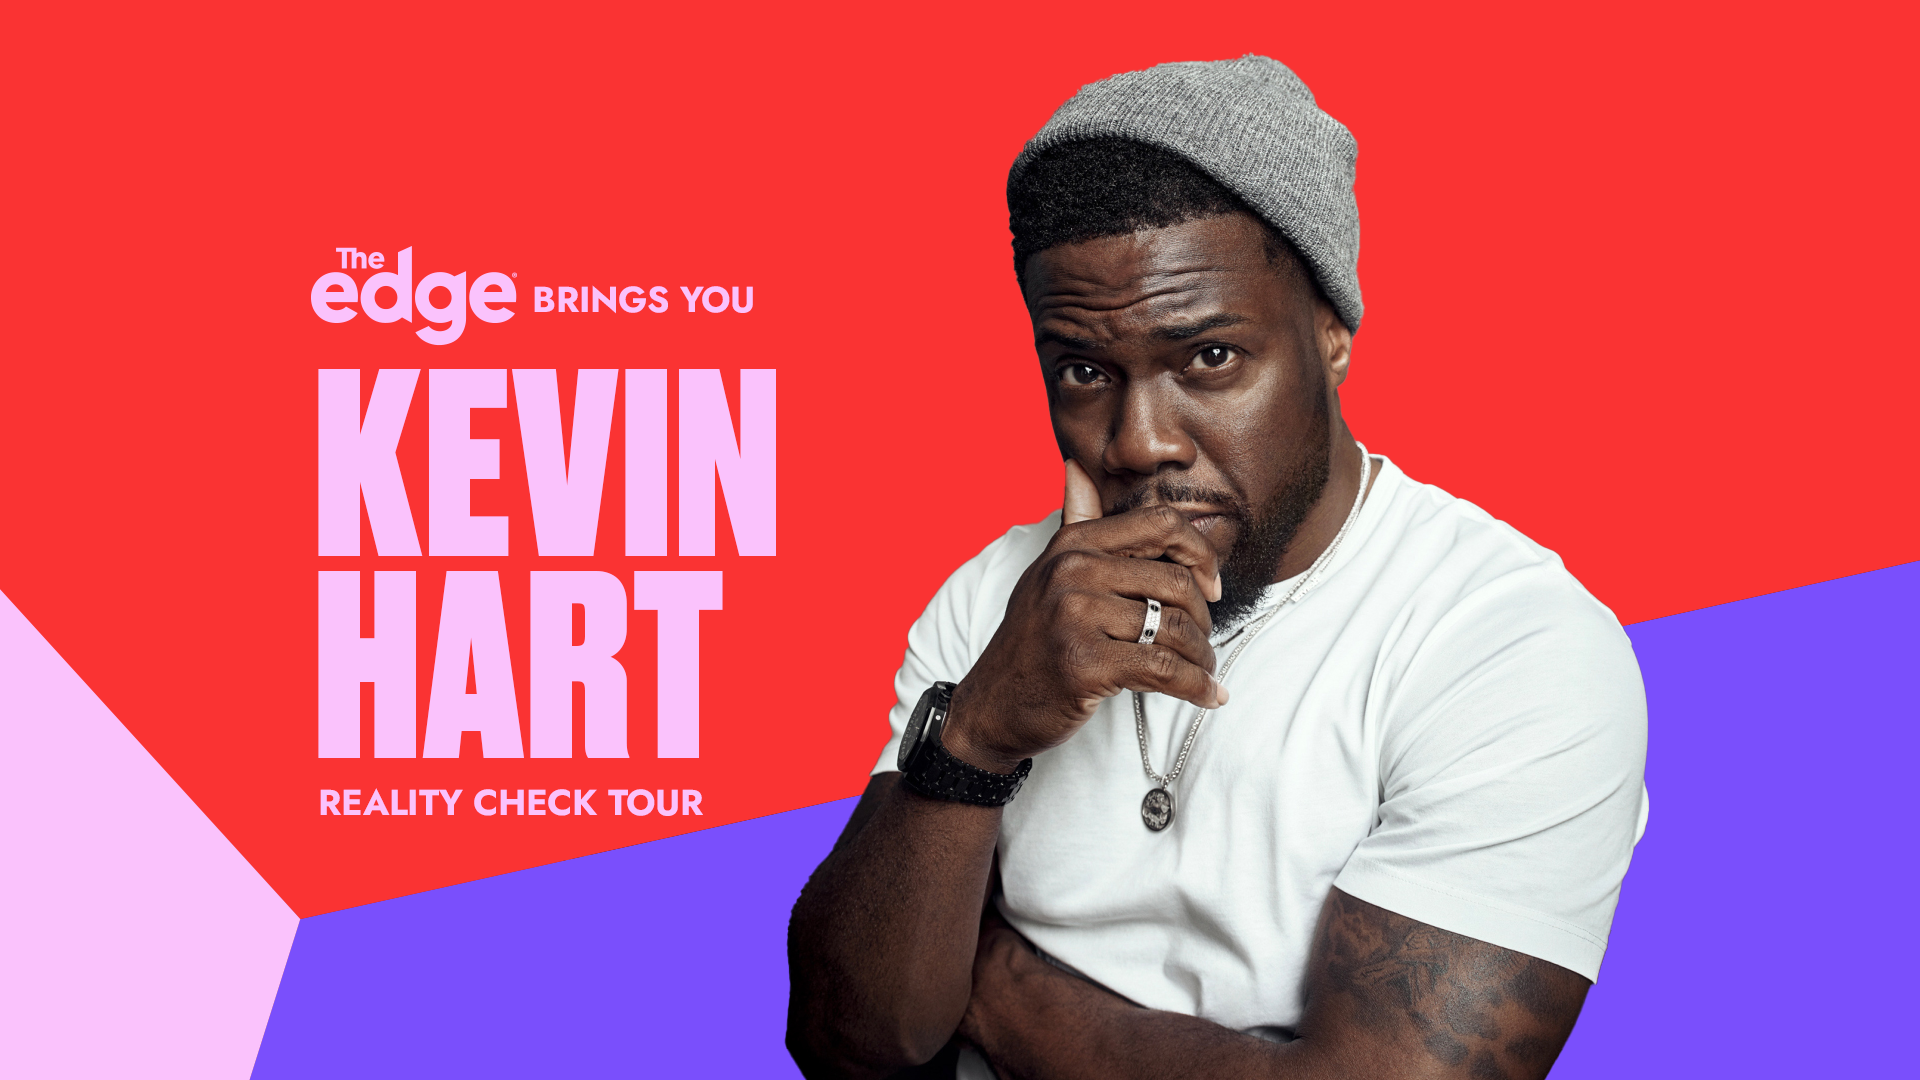 The Edge brings you Kevin Hart Reality Check Tour